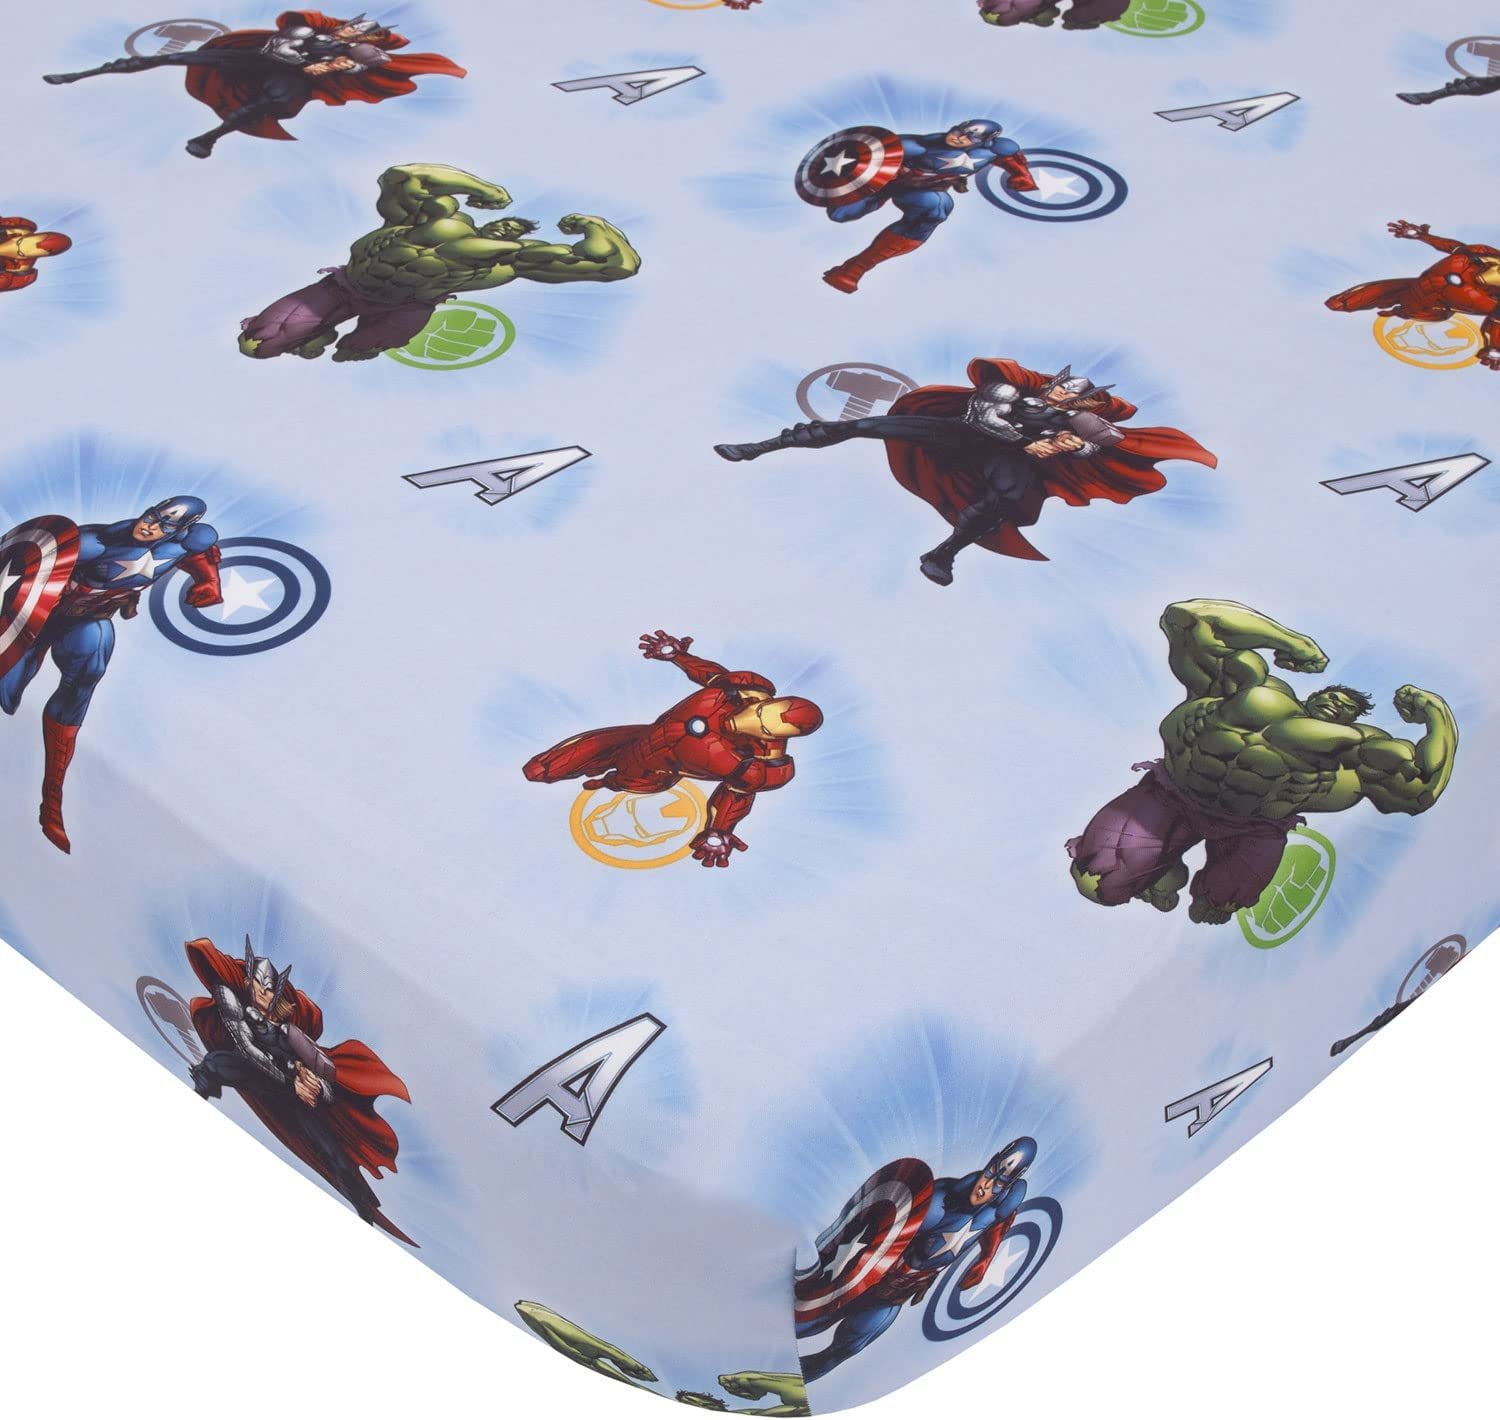 Marvel Avengers Fitted Crib Sheet 100% Soft Microfiber, Baby Sheet, Fits Standard Size Crib Mattress 28in x 52in - image 1 of 4